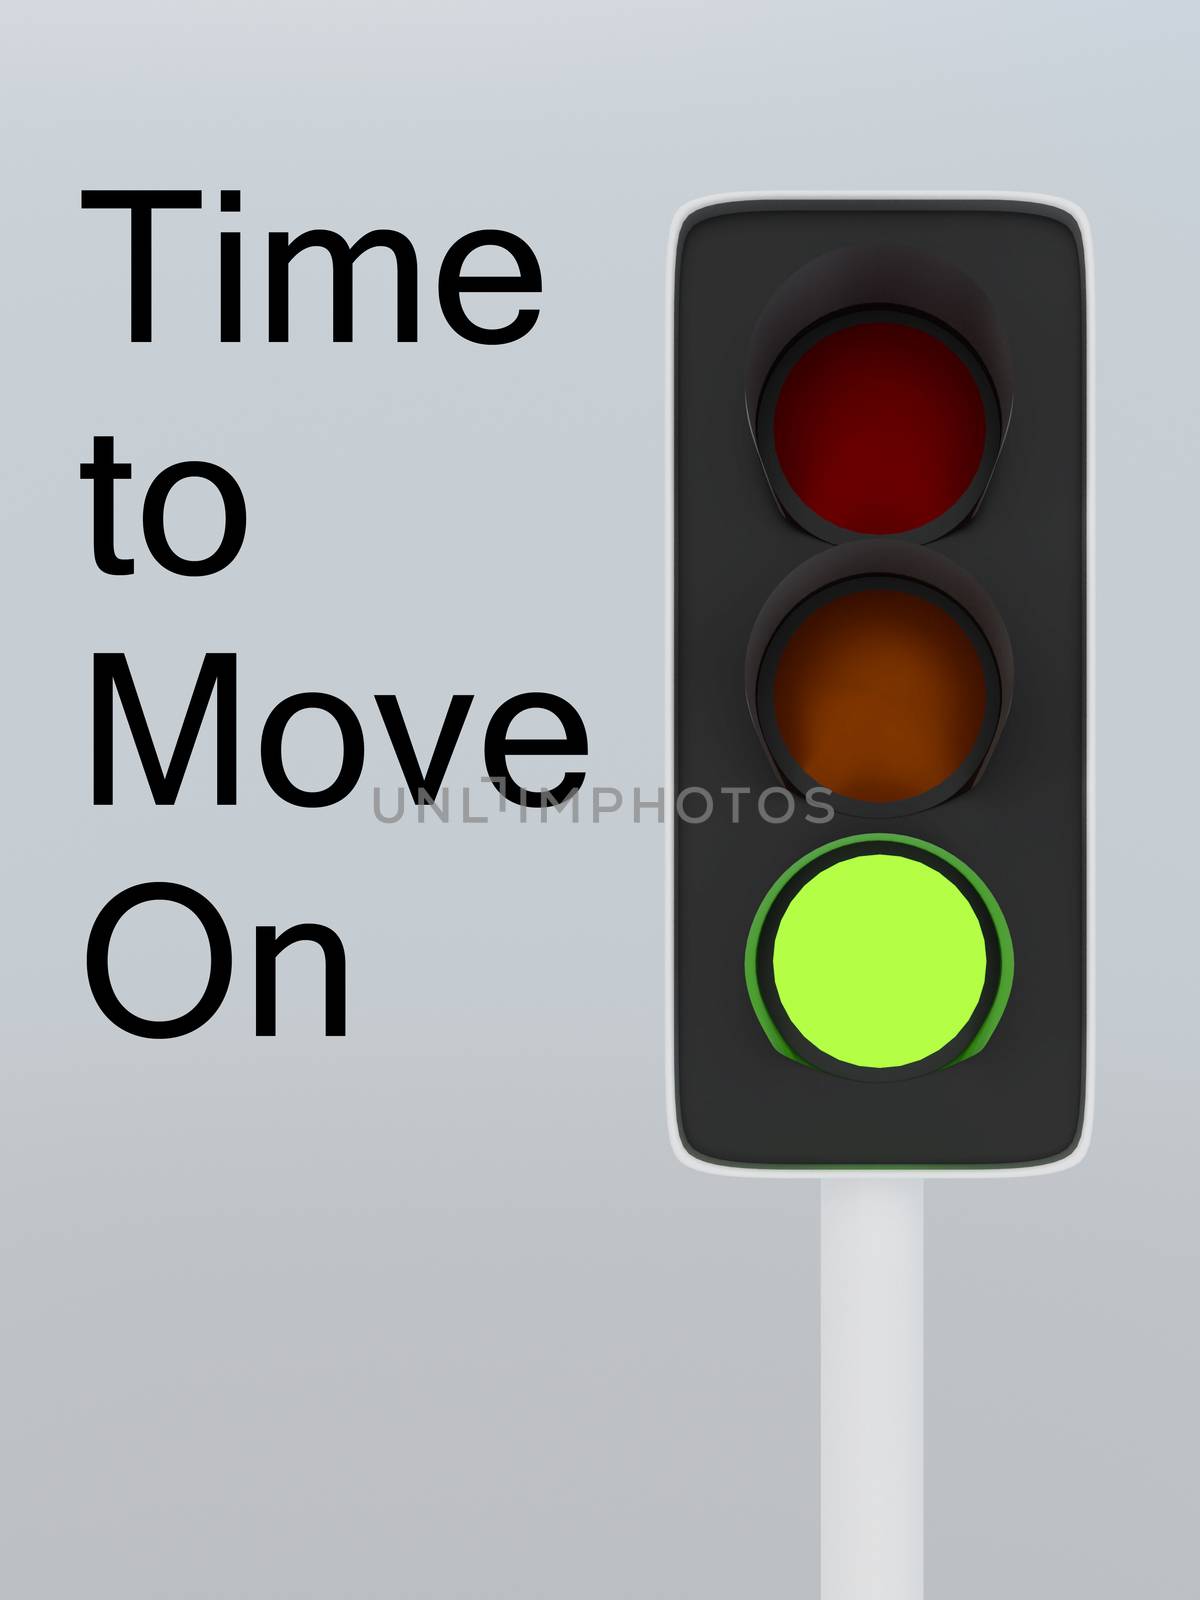 Time to Move On concept by HD_premium_shots